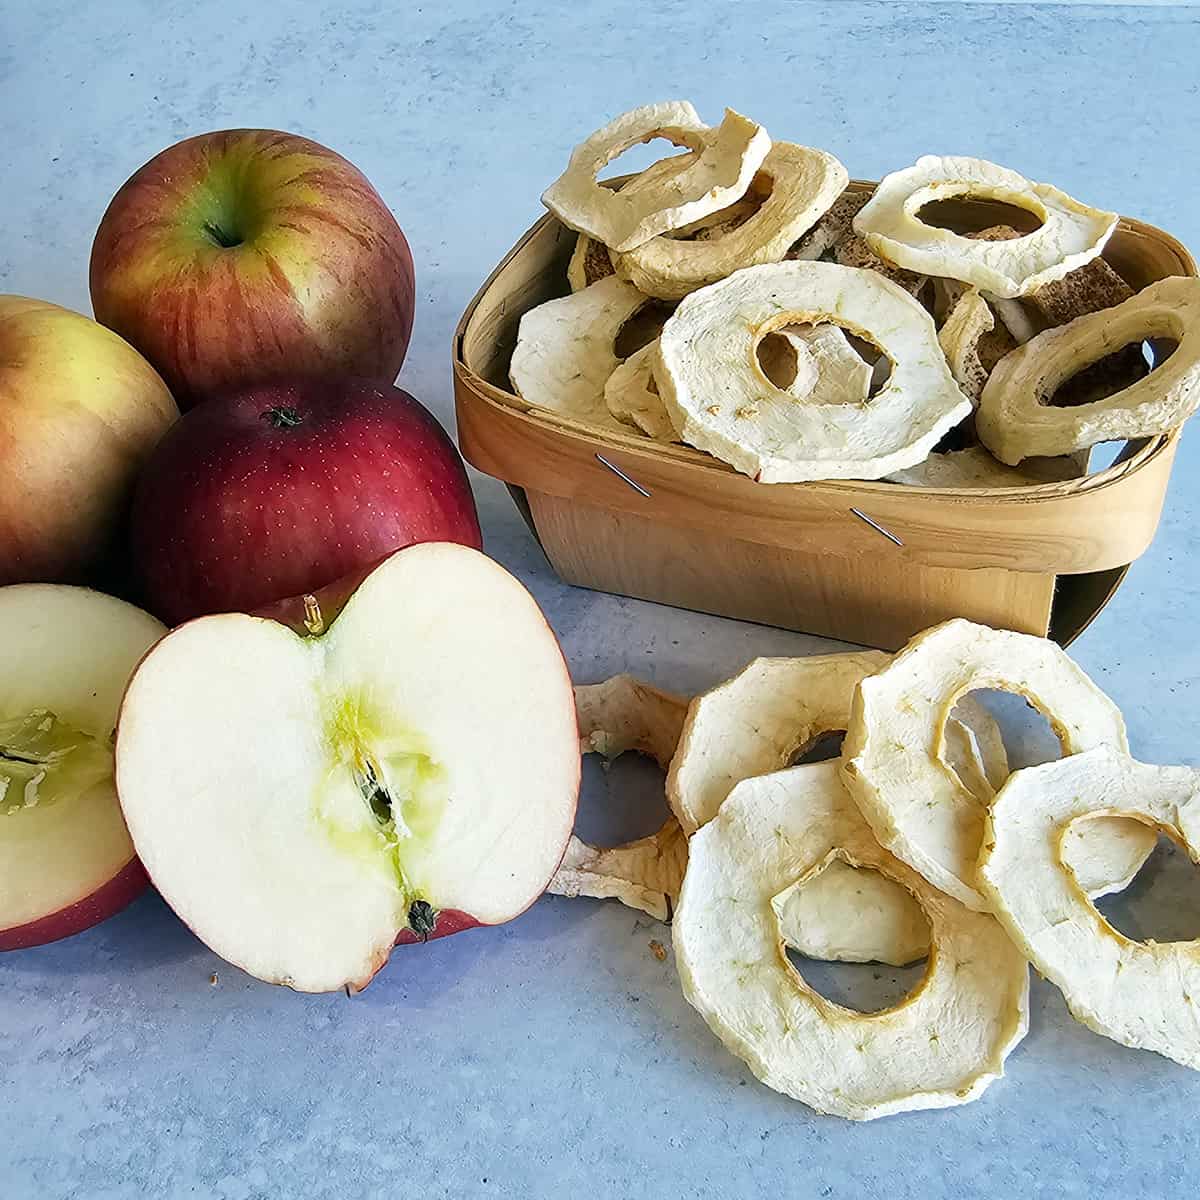 Best Apples for Dehydrating